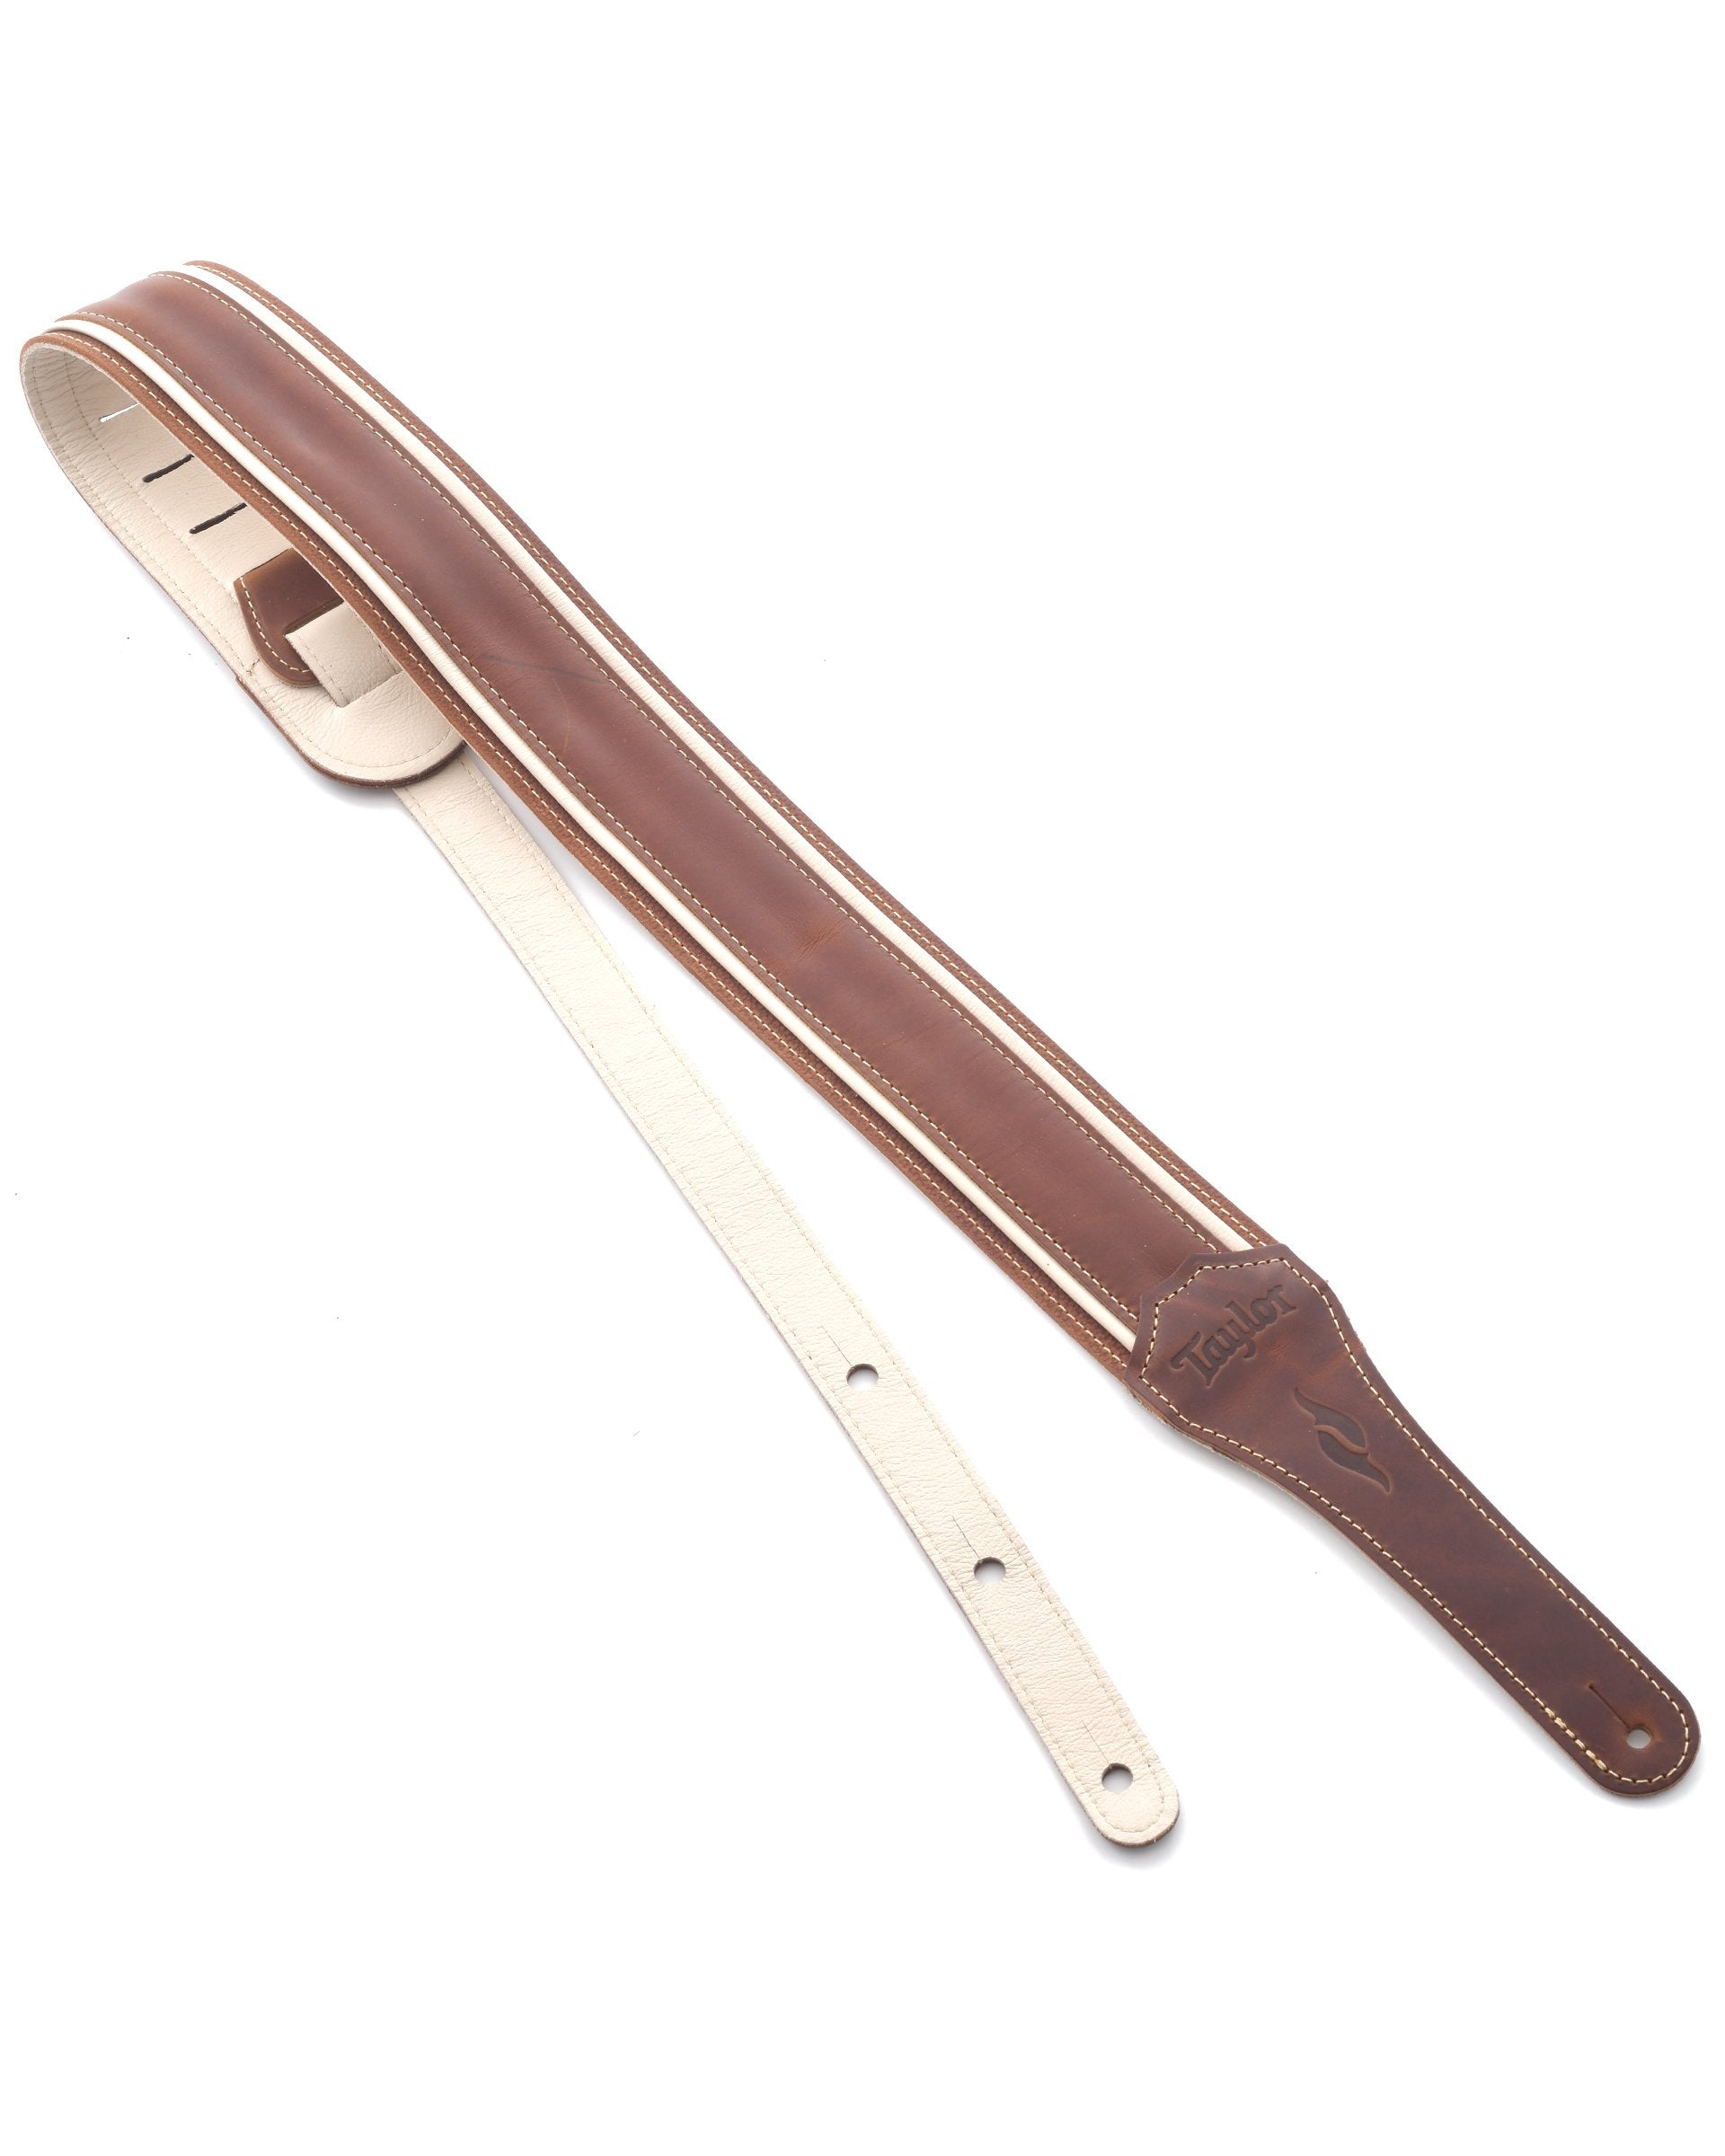 Image 1 of Taylor Element 2.5" Leather Guitar Strap, Brown/Cream - SKU# 8250-03 : Product Type Accessories & Parts : Elderly Instruments